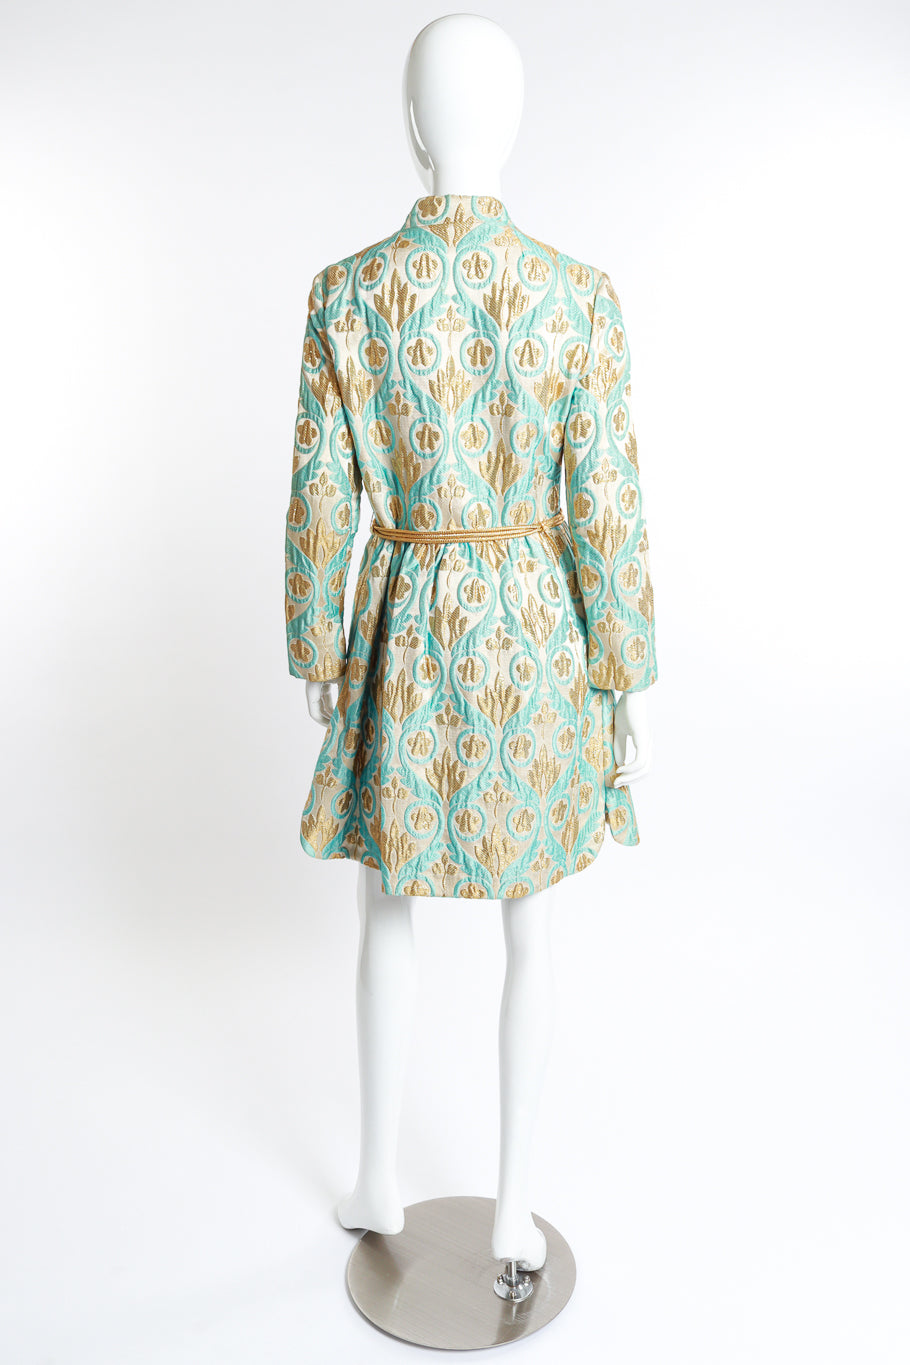 Vintage Victor Costa gold lurex floral embroidered evening coat rear view as worn on mannequin @RECESS LA